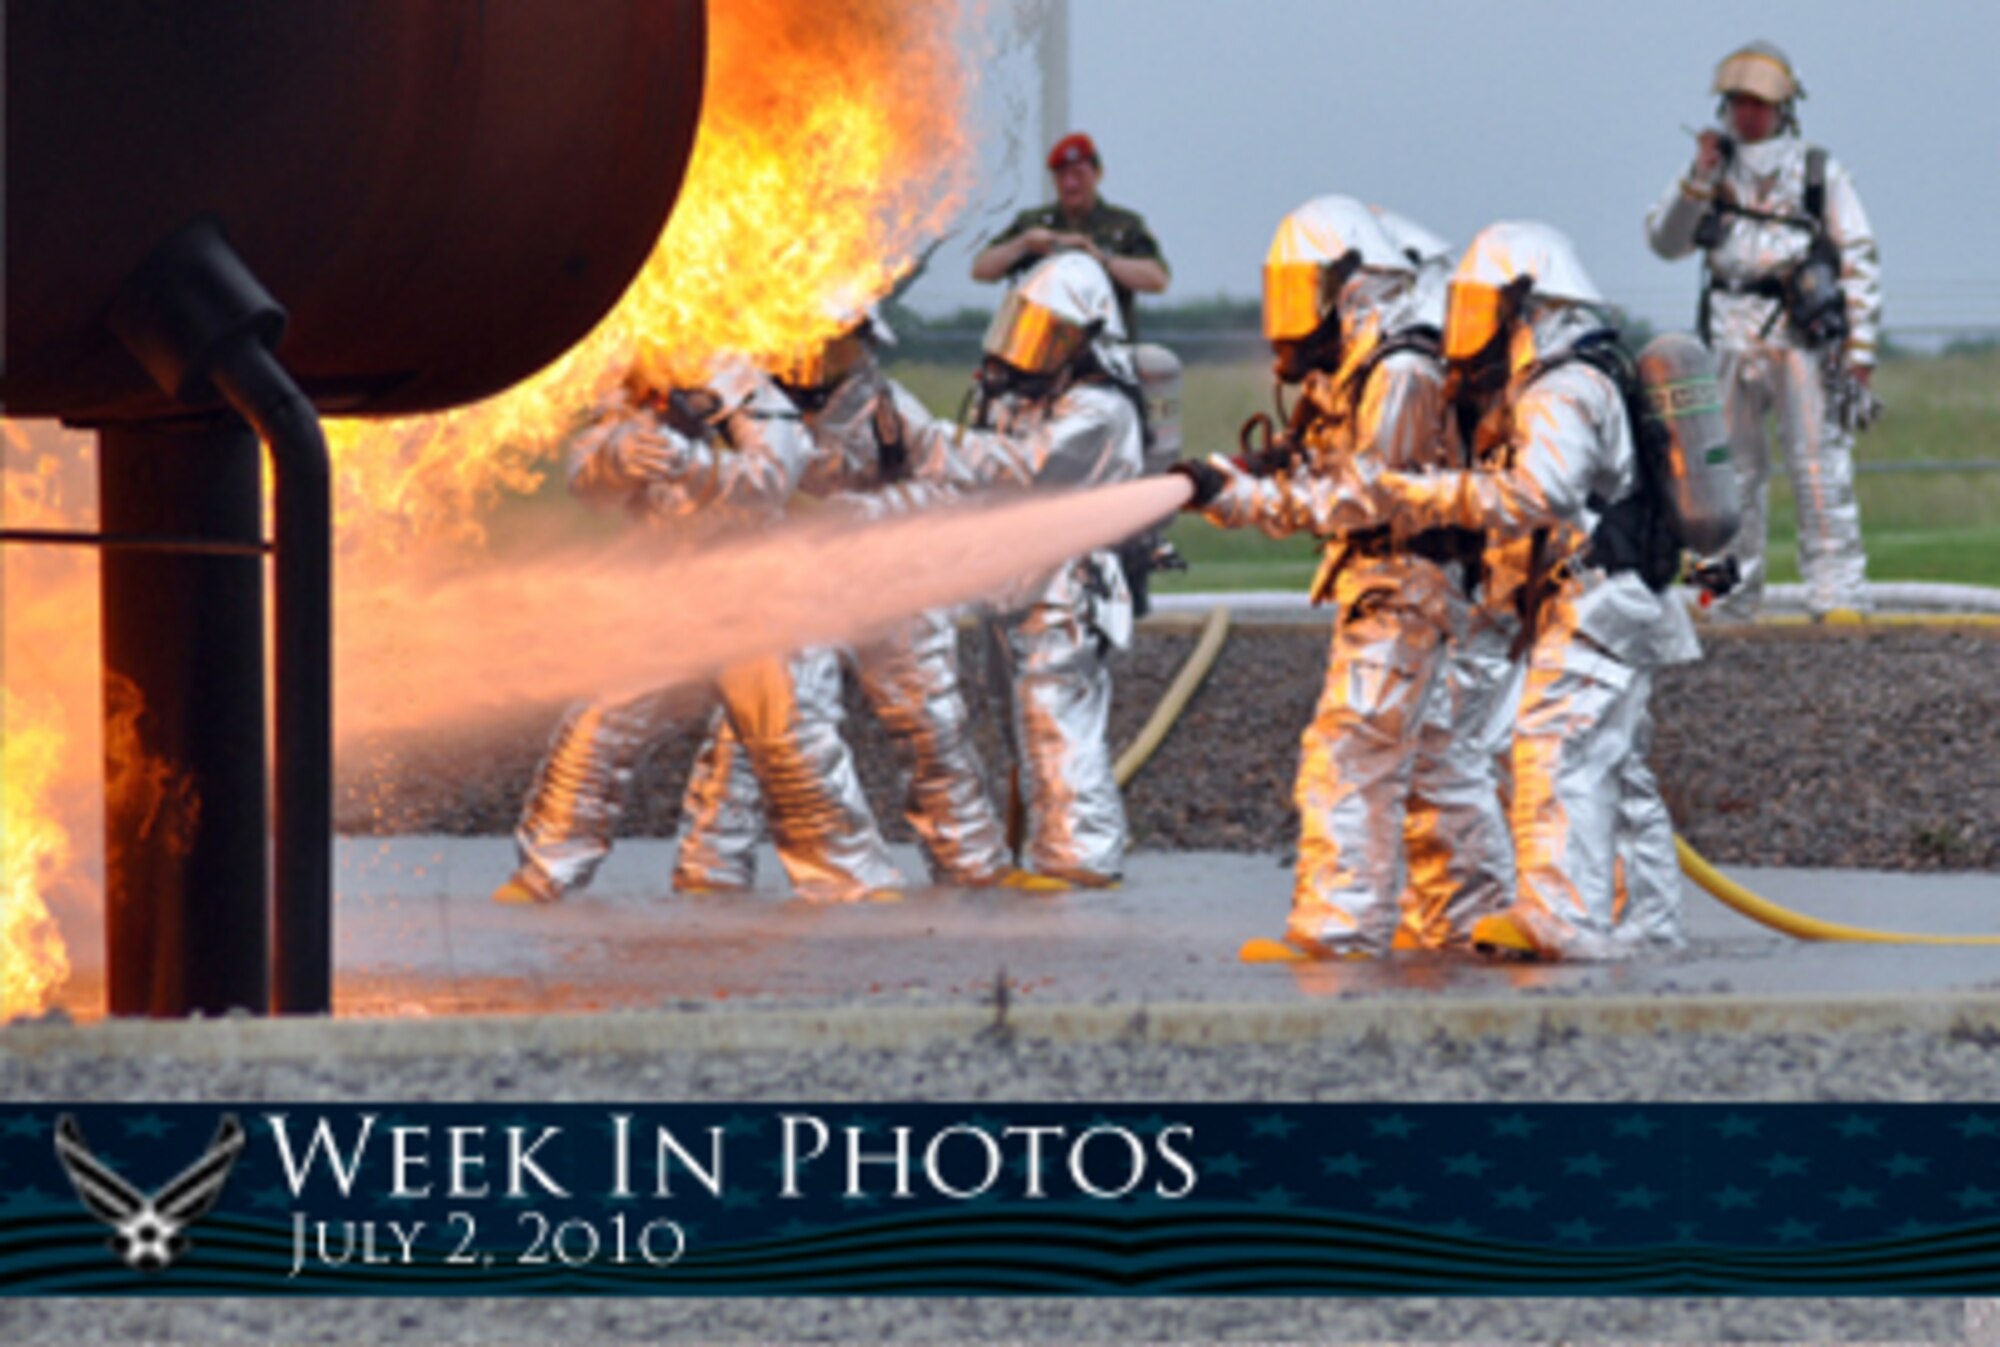 Air Force Week in Photos for July 2, 2010, highlights photos from around the Air Force. In this photo by Master Sgt. Bob Barko Jr., 910th Civil Engineer Squadron firefighters conduct a demonstration at the Youngstown Air Reserve Station, Ohio, fire pit as German reserve officer Lt. Col. Patrick Hofmann looks on. (U.S. Air Force photo illustration/Corey Parrish)